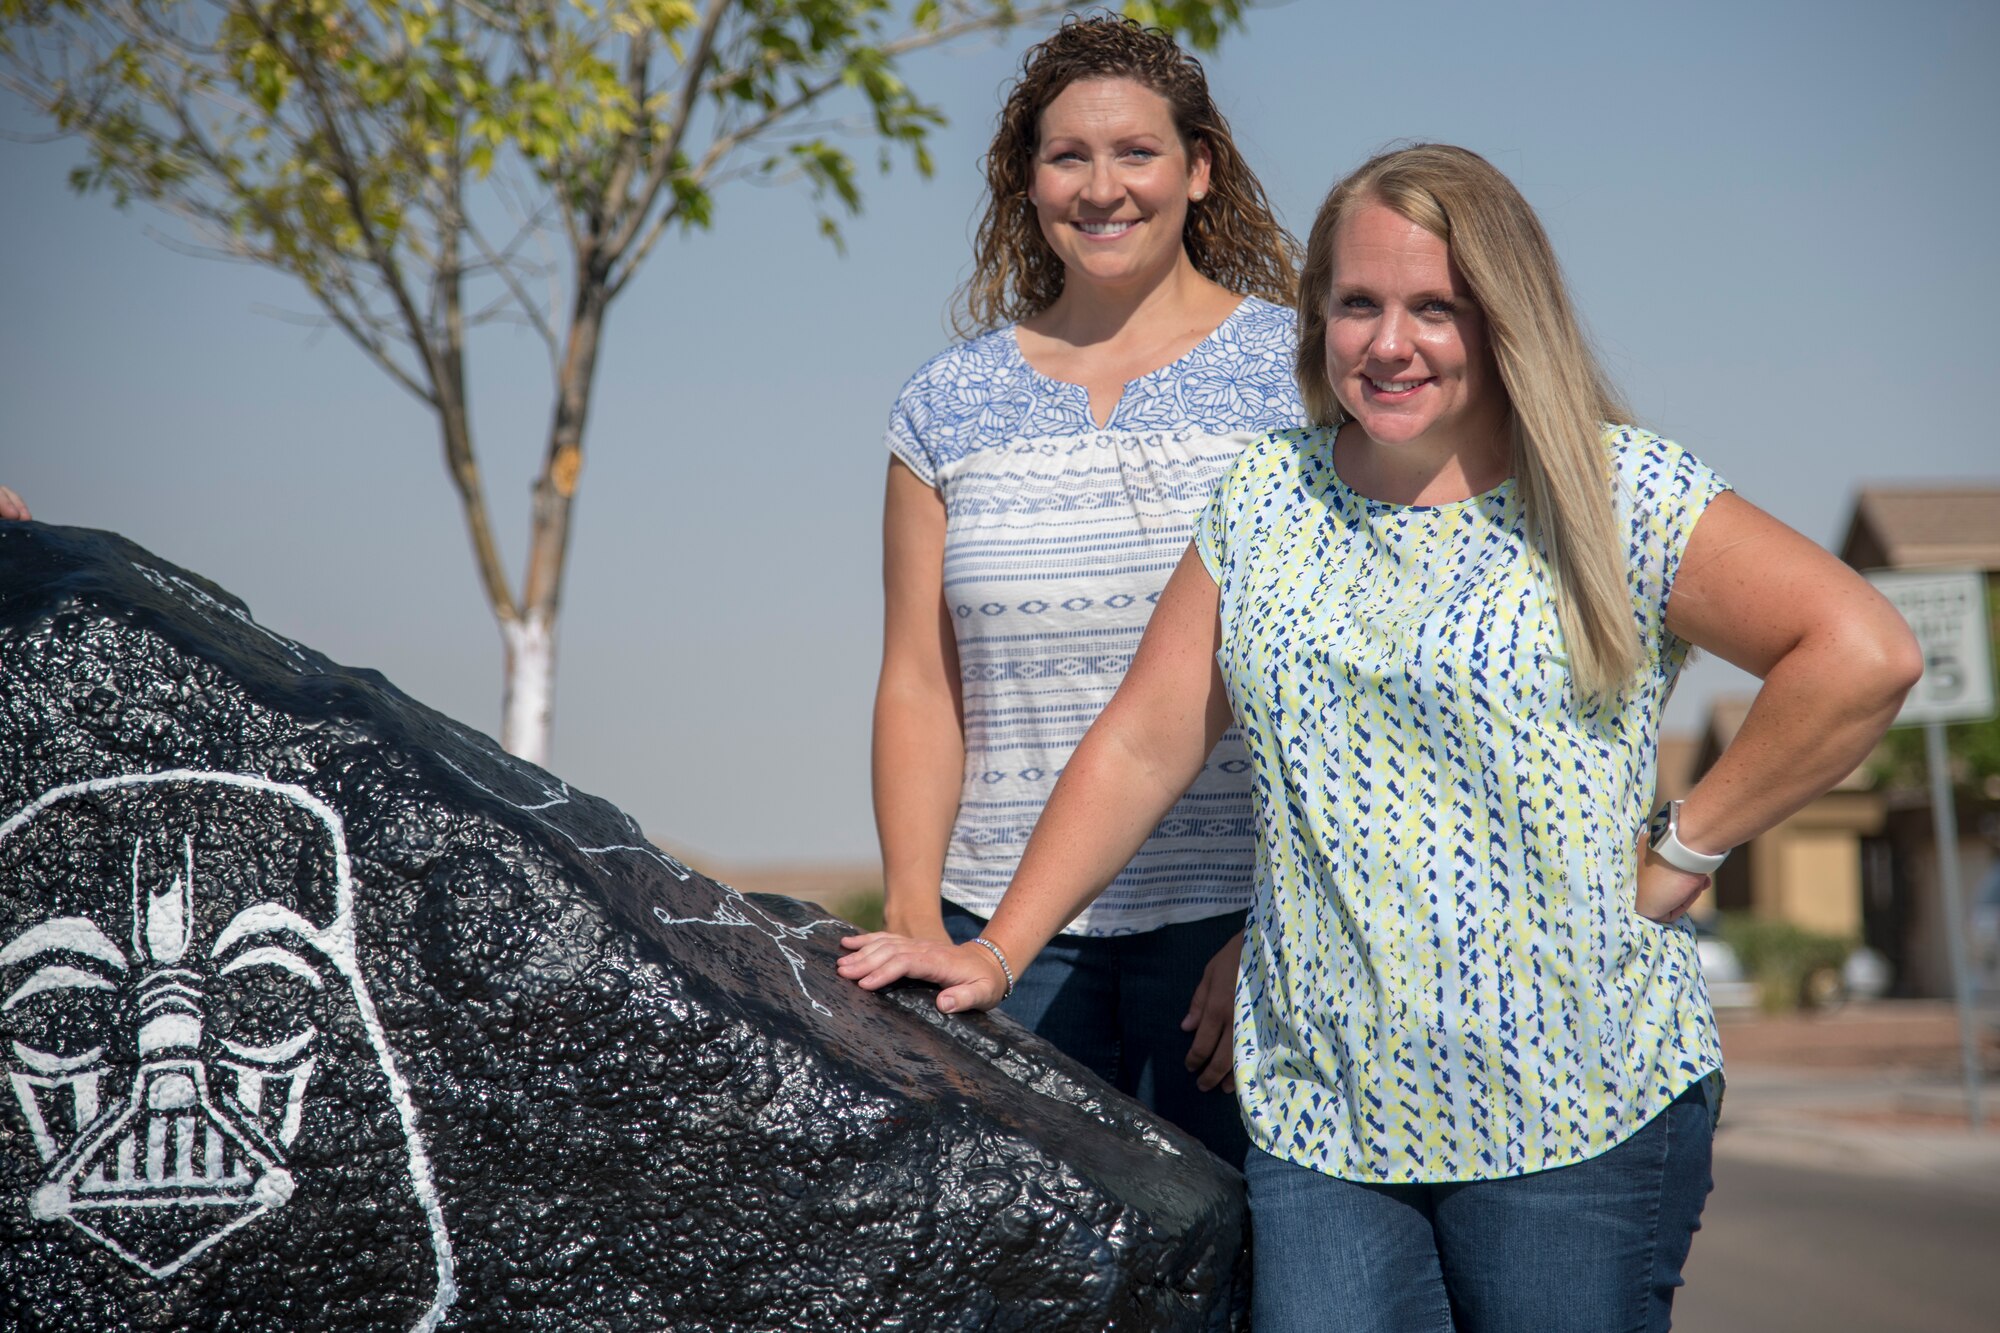 Maj. Naomi Donovan, left, 924th Aircraft Maintenance Squadron commander and 2018 49th Mission Support Group key spouse, and Jackie Ottesen, 6th Attack Squadron key spouse, pose for a photo at the “Holloman rock,” June 23, 2020, on Holloman Air Force Base, N.M. Holloman key spouses paint this decorative rock approximately every two weeks to highlight fun events, holidays and general base awareness activities in order to promote community, cohesion and aid in putting a smile on Team Holloman members’ faces. (U.S. Air Force photo by Senior Airman Collette Brooks)